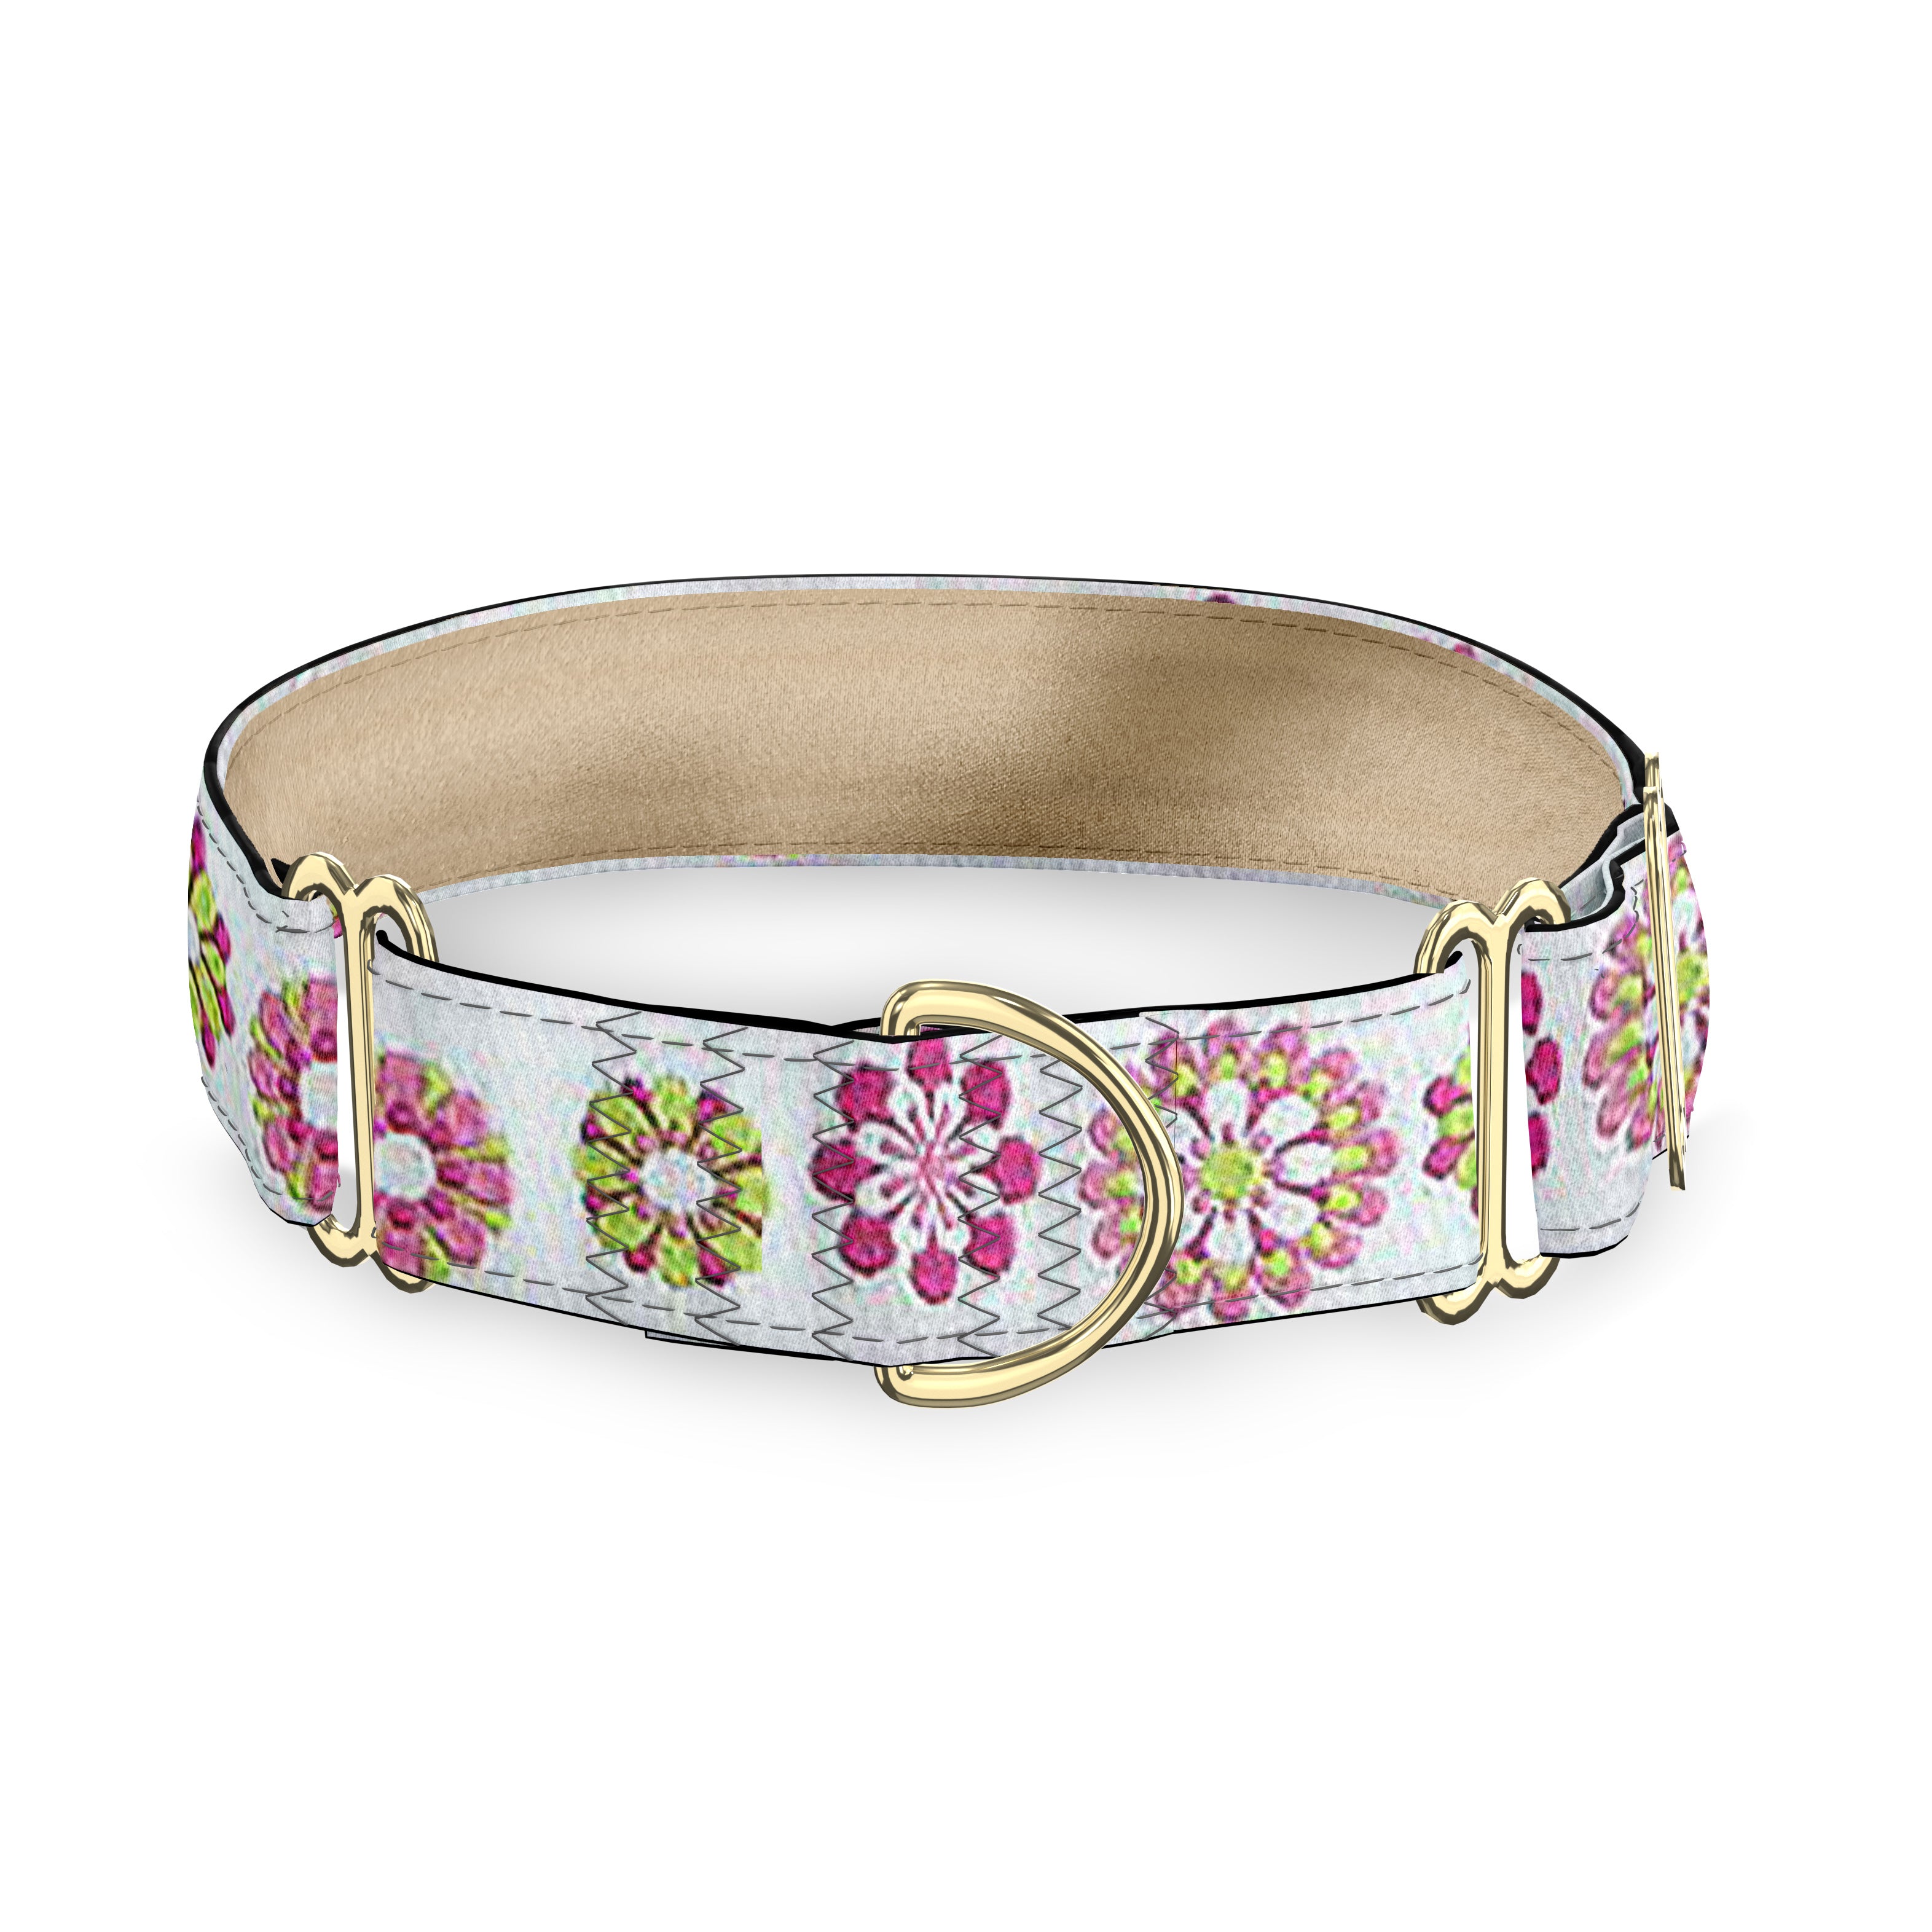 Carnaby Hot Pink, White and Lime Green Dog Collar